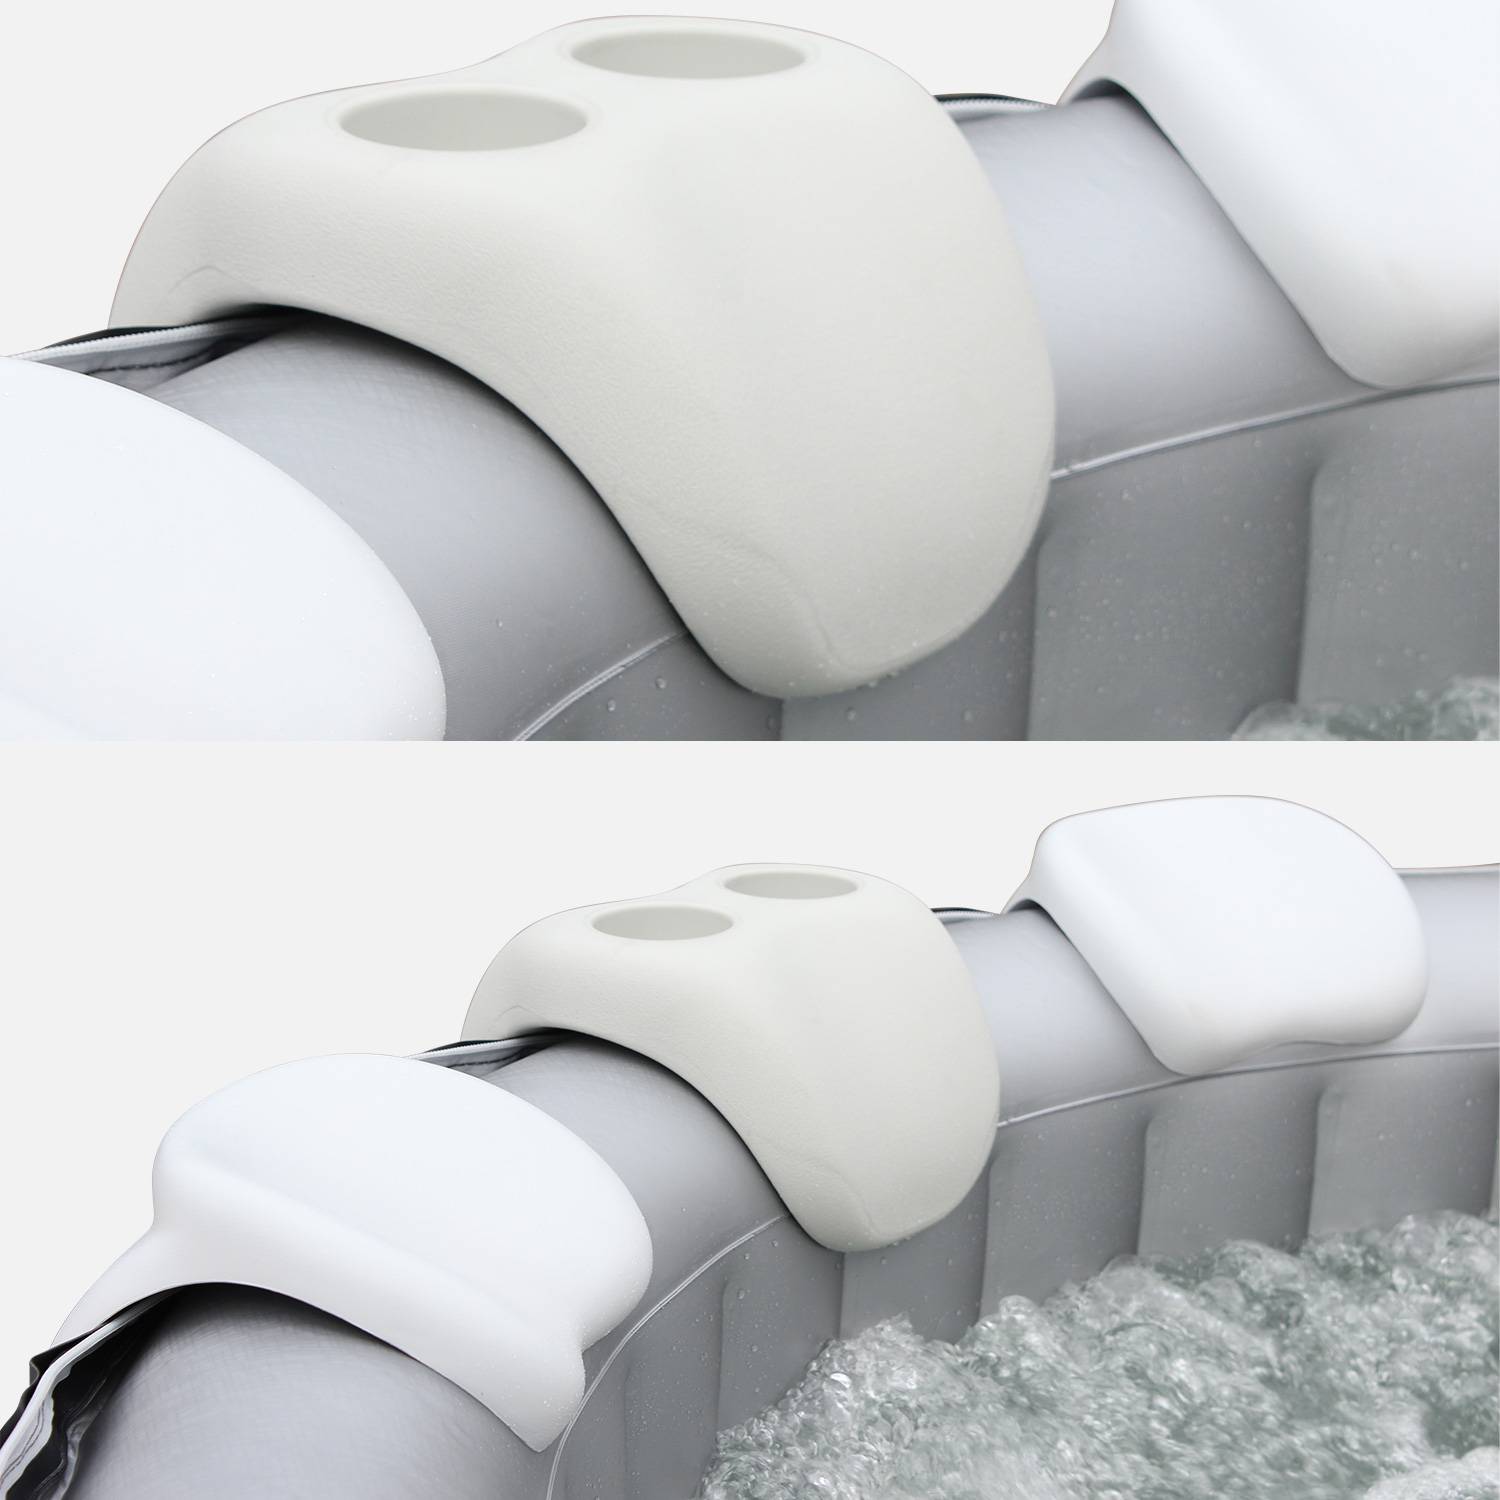 Pair of headrests and cupholder for inflatable spa - MSpa,sweeek,Photo3